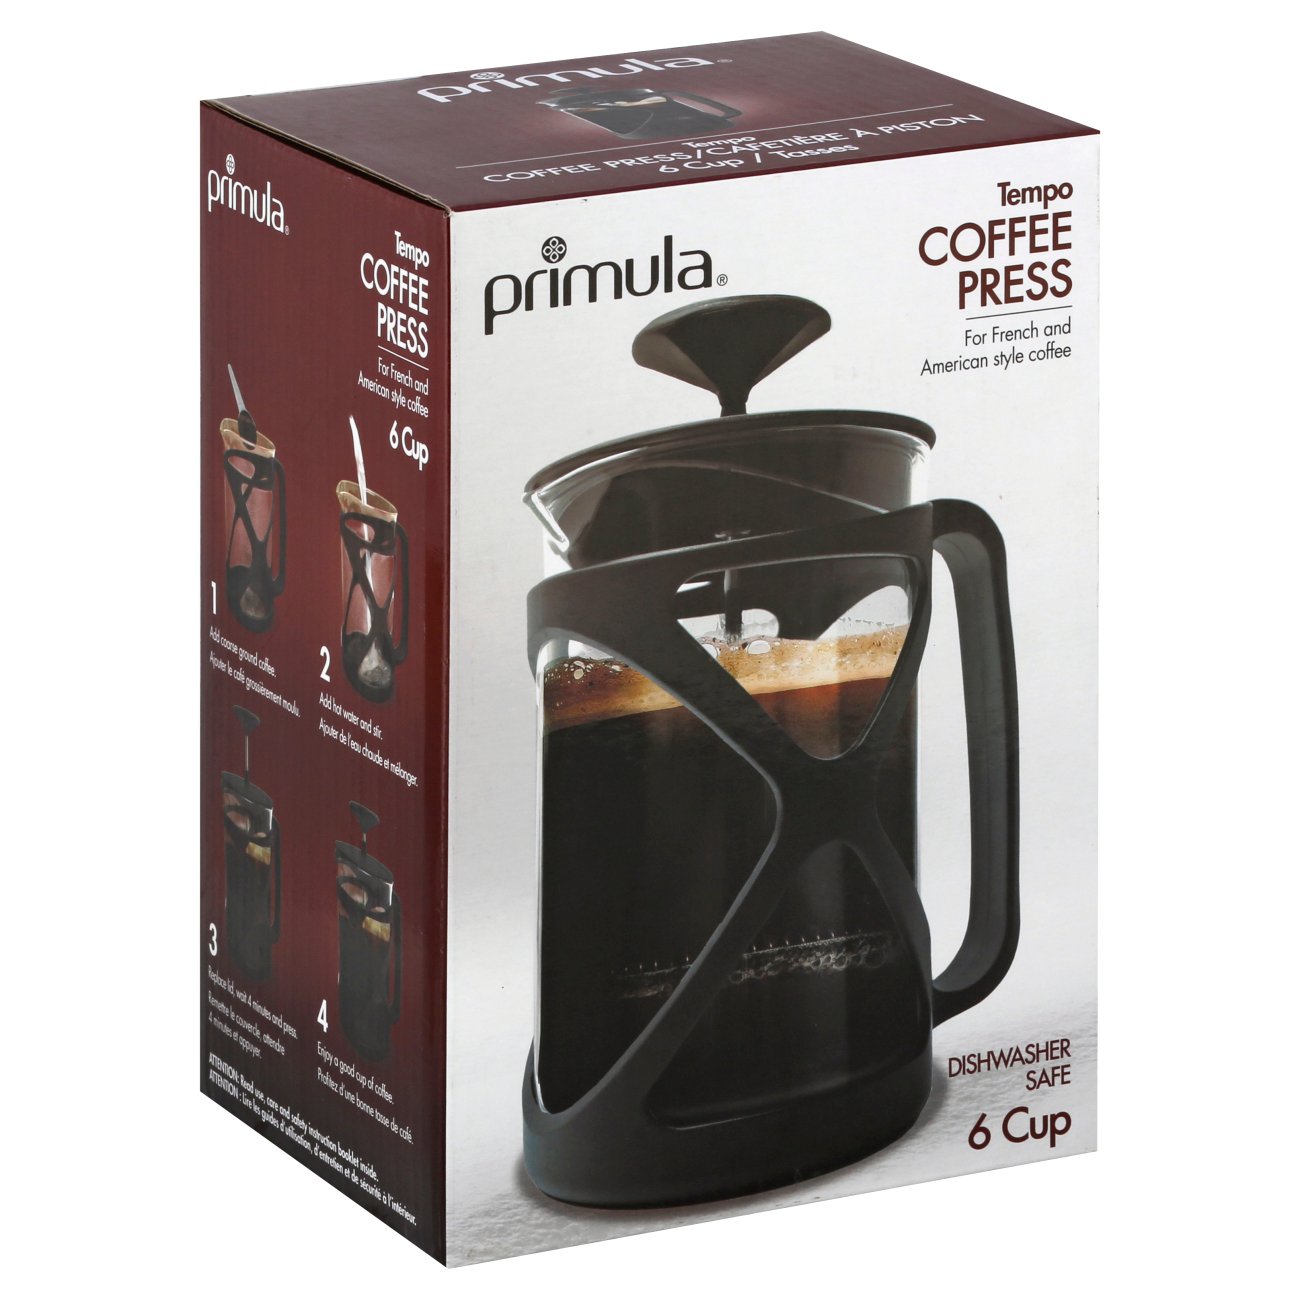 French press coffee maker - Household Items - Bakersfield